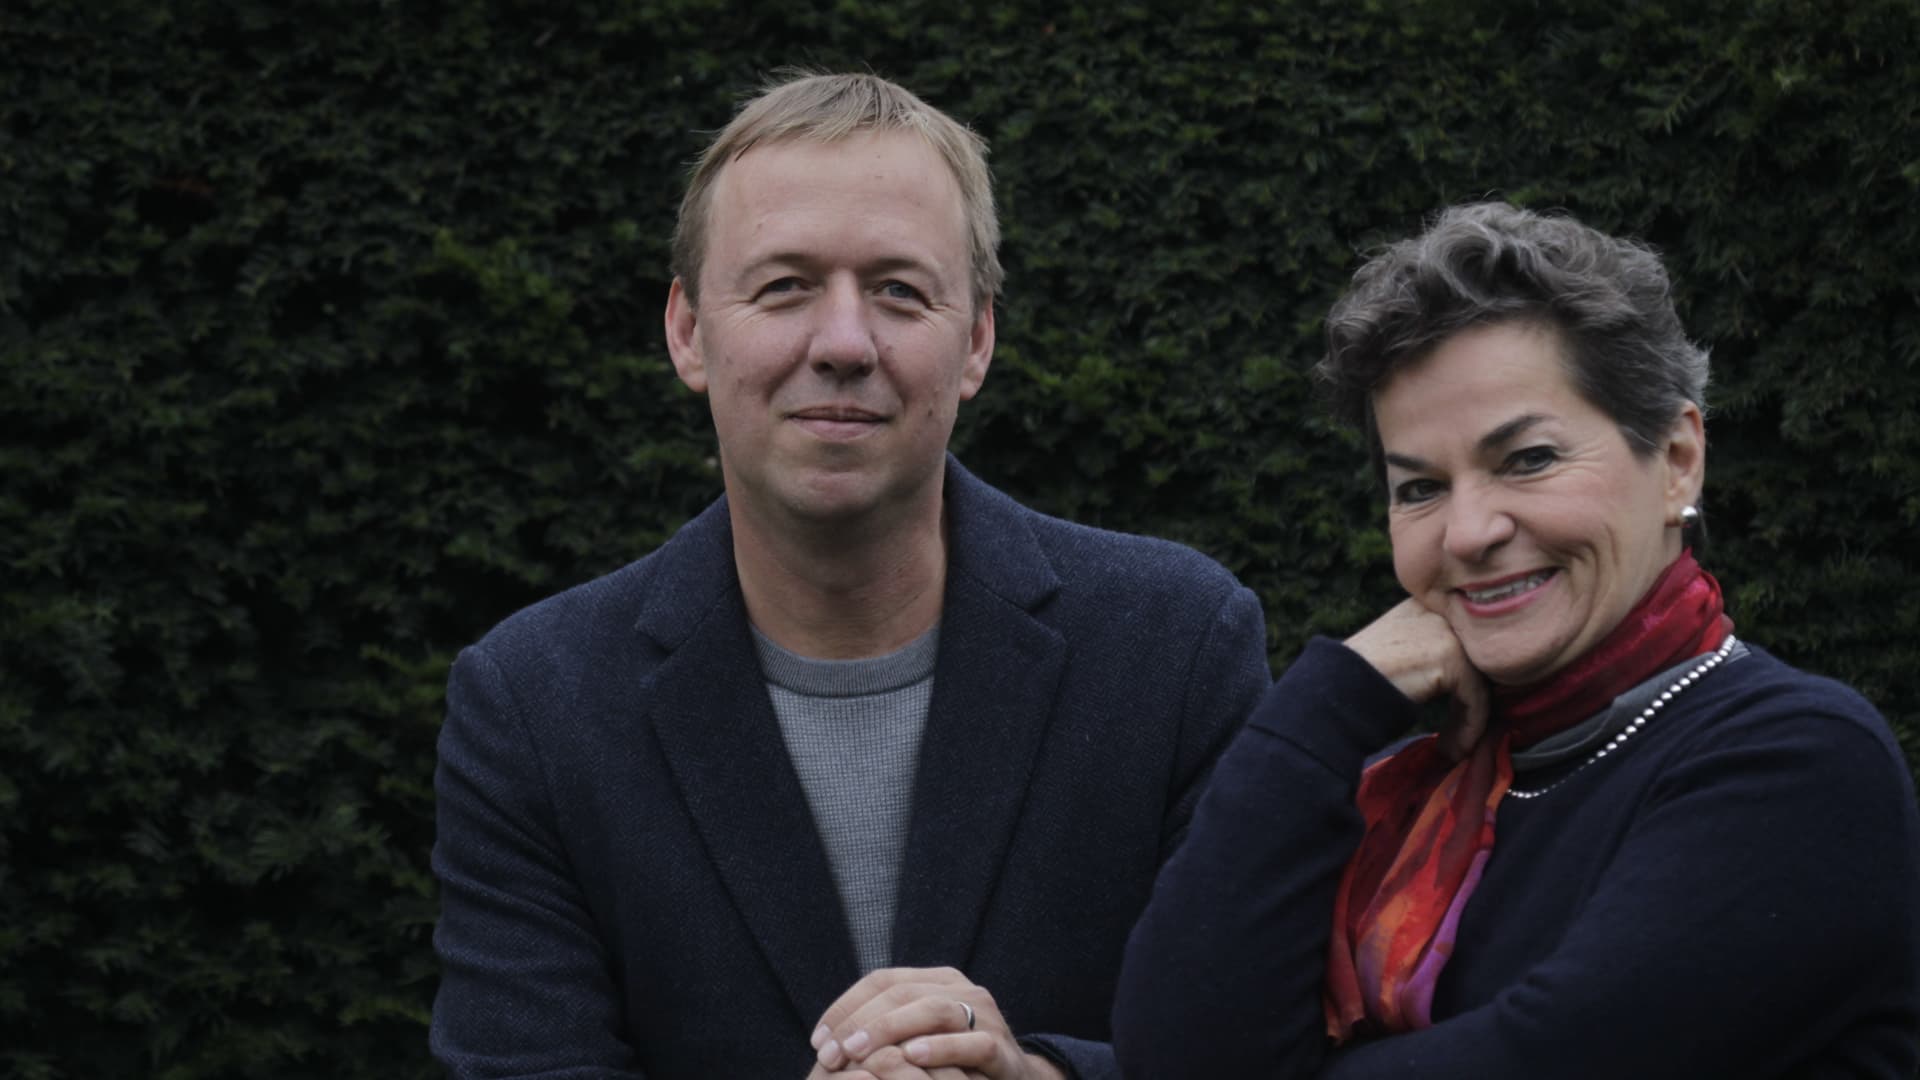 Tom Rivett-Carnac and Christiana Figueres, co-founders of Global Optimism